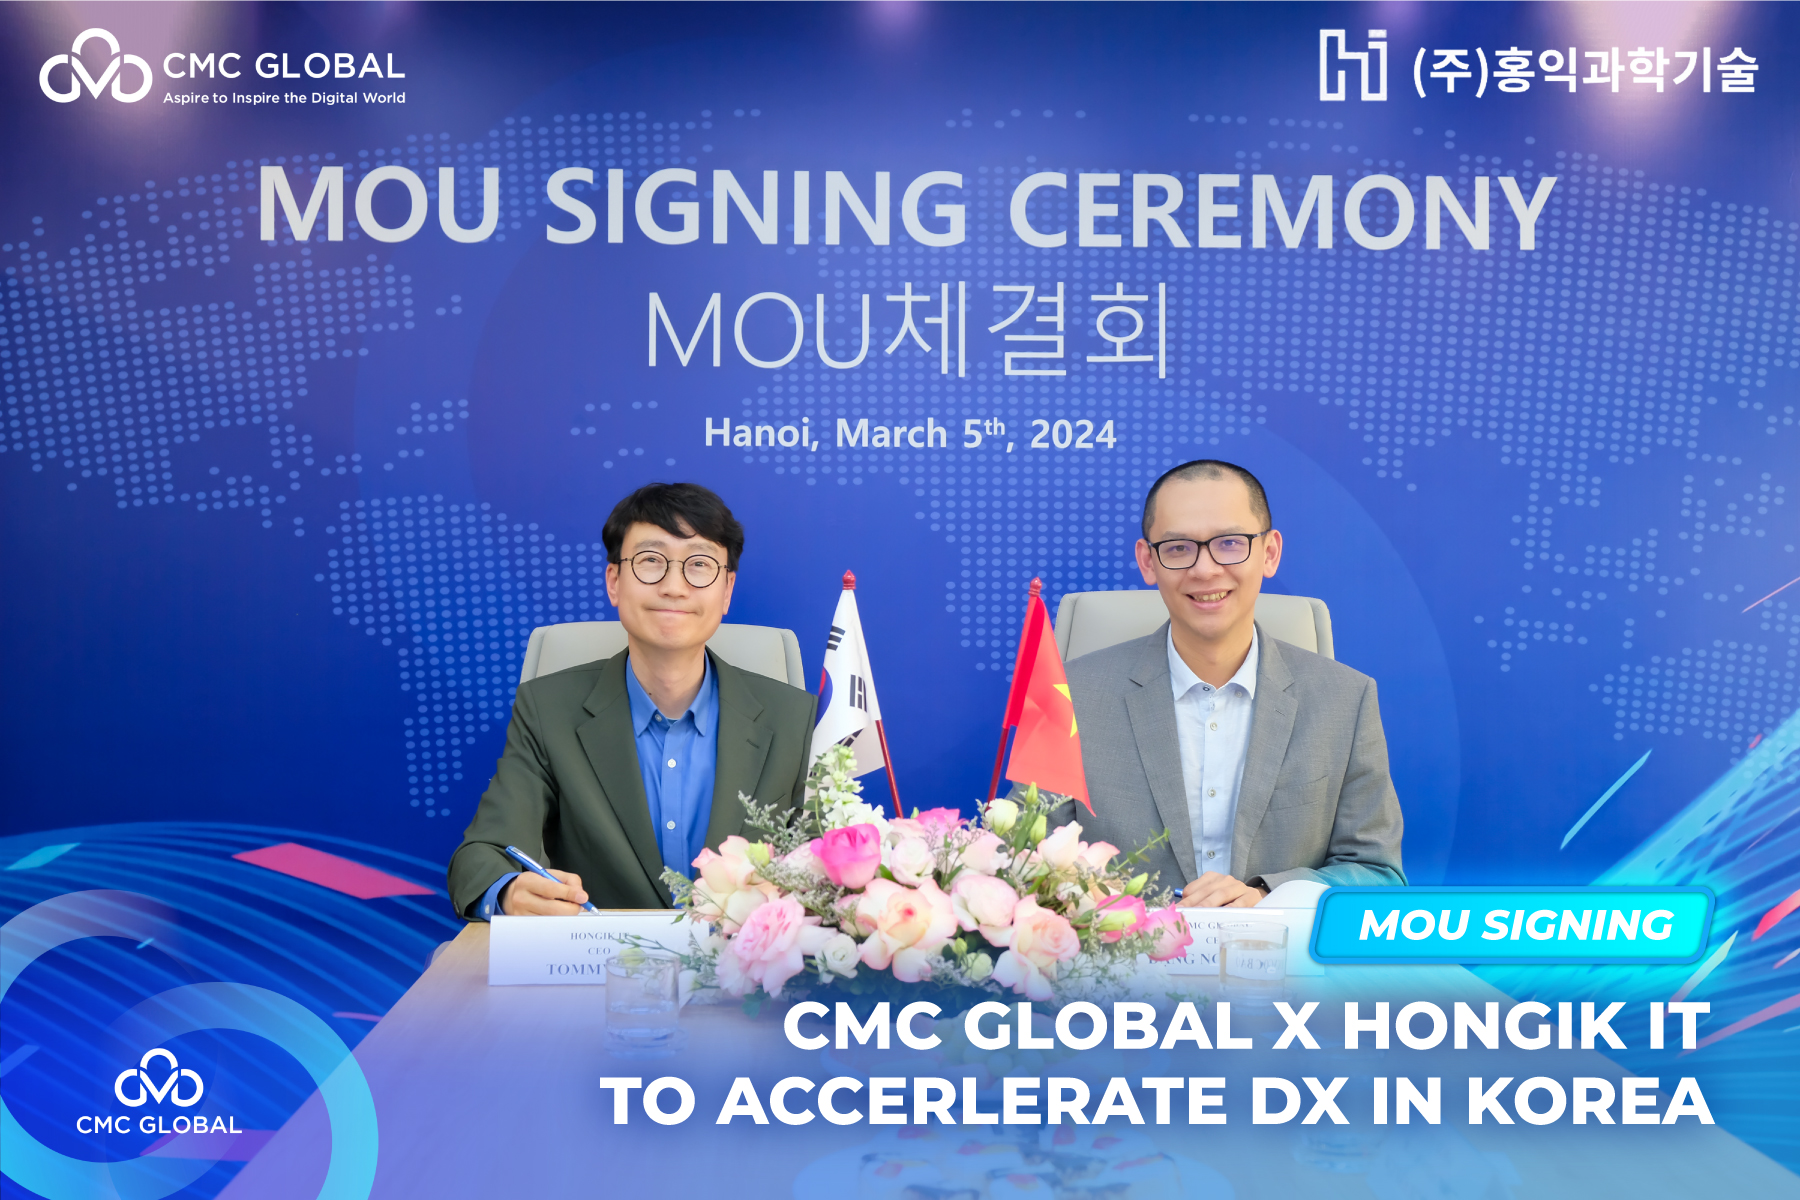 CMC Global Entered a MOU with Hongik IT (Korea), Initiating Business Opportunities in The “Land of Kimchi”